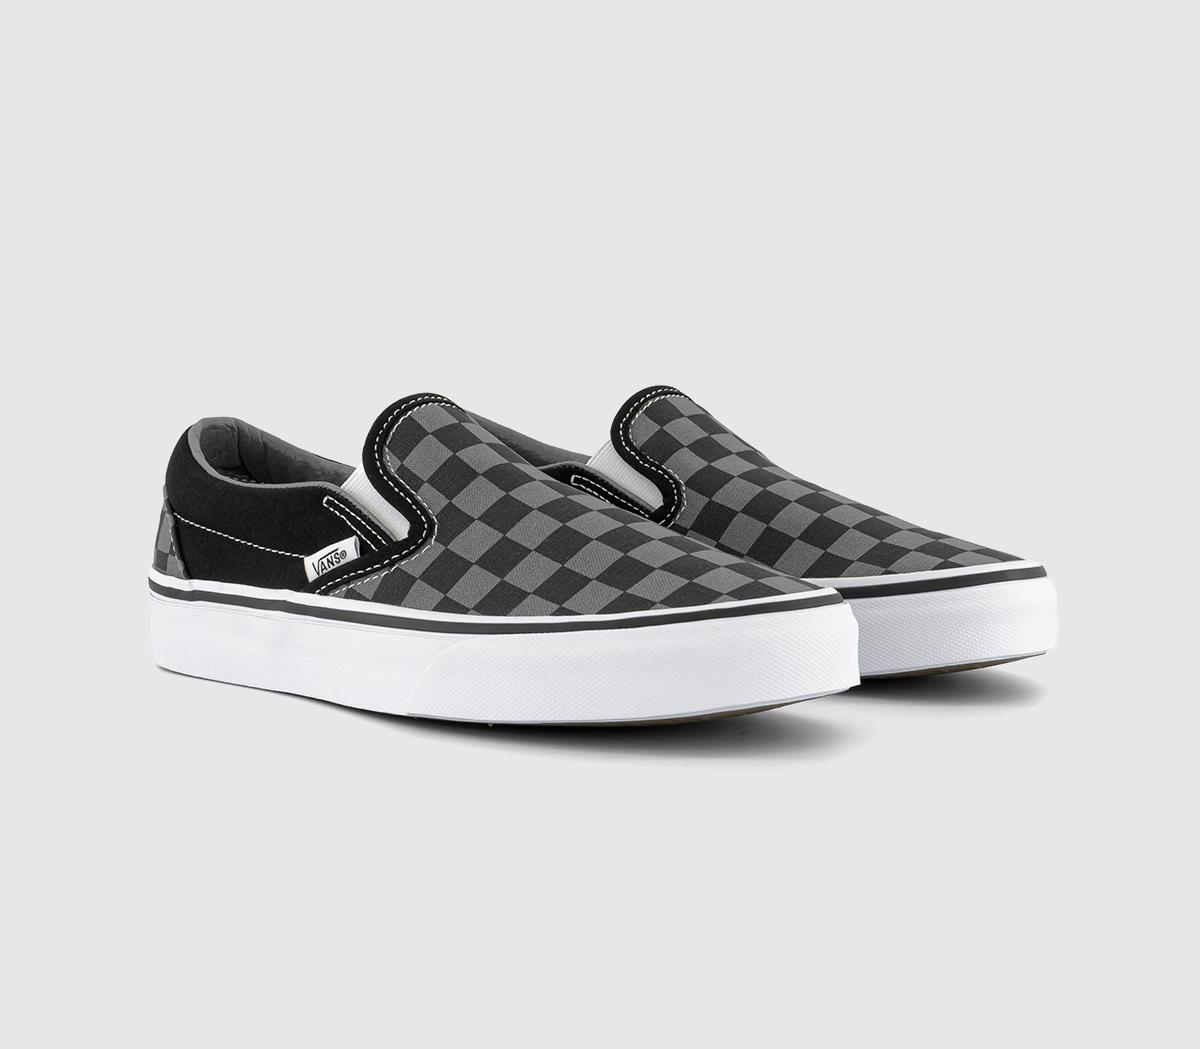 Vans Classic Slip On Trainers Black Pewter Check Black/Grey, 6.5